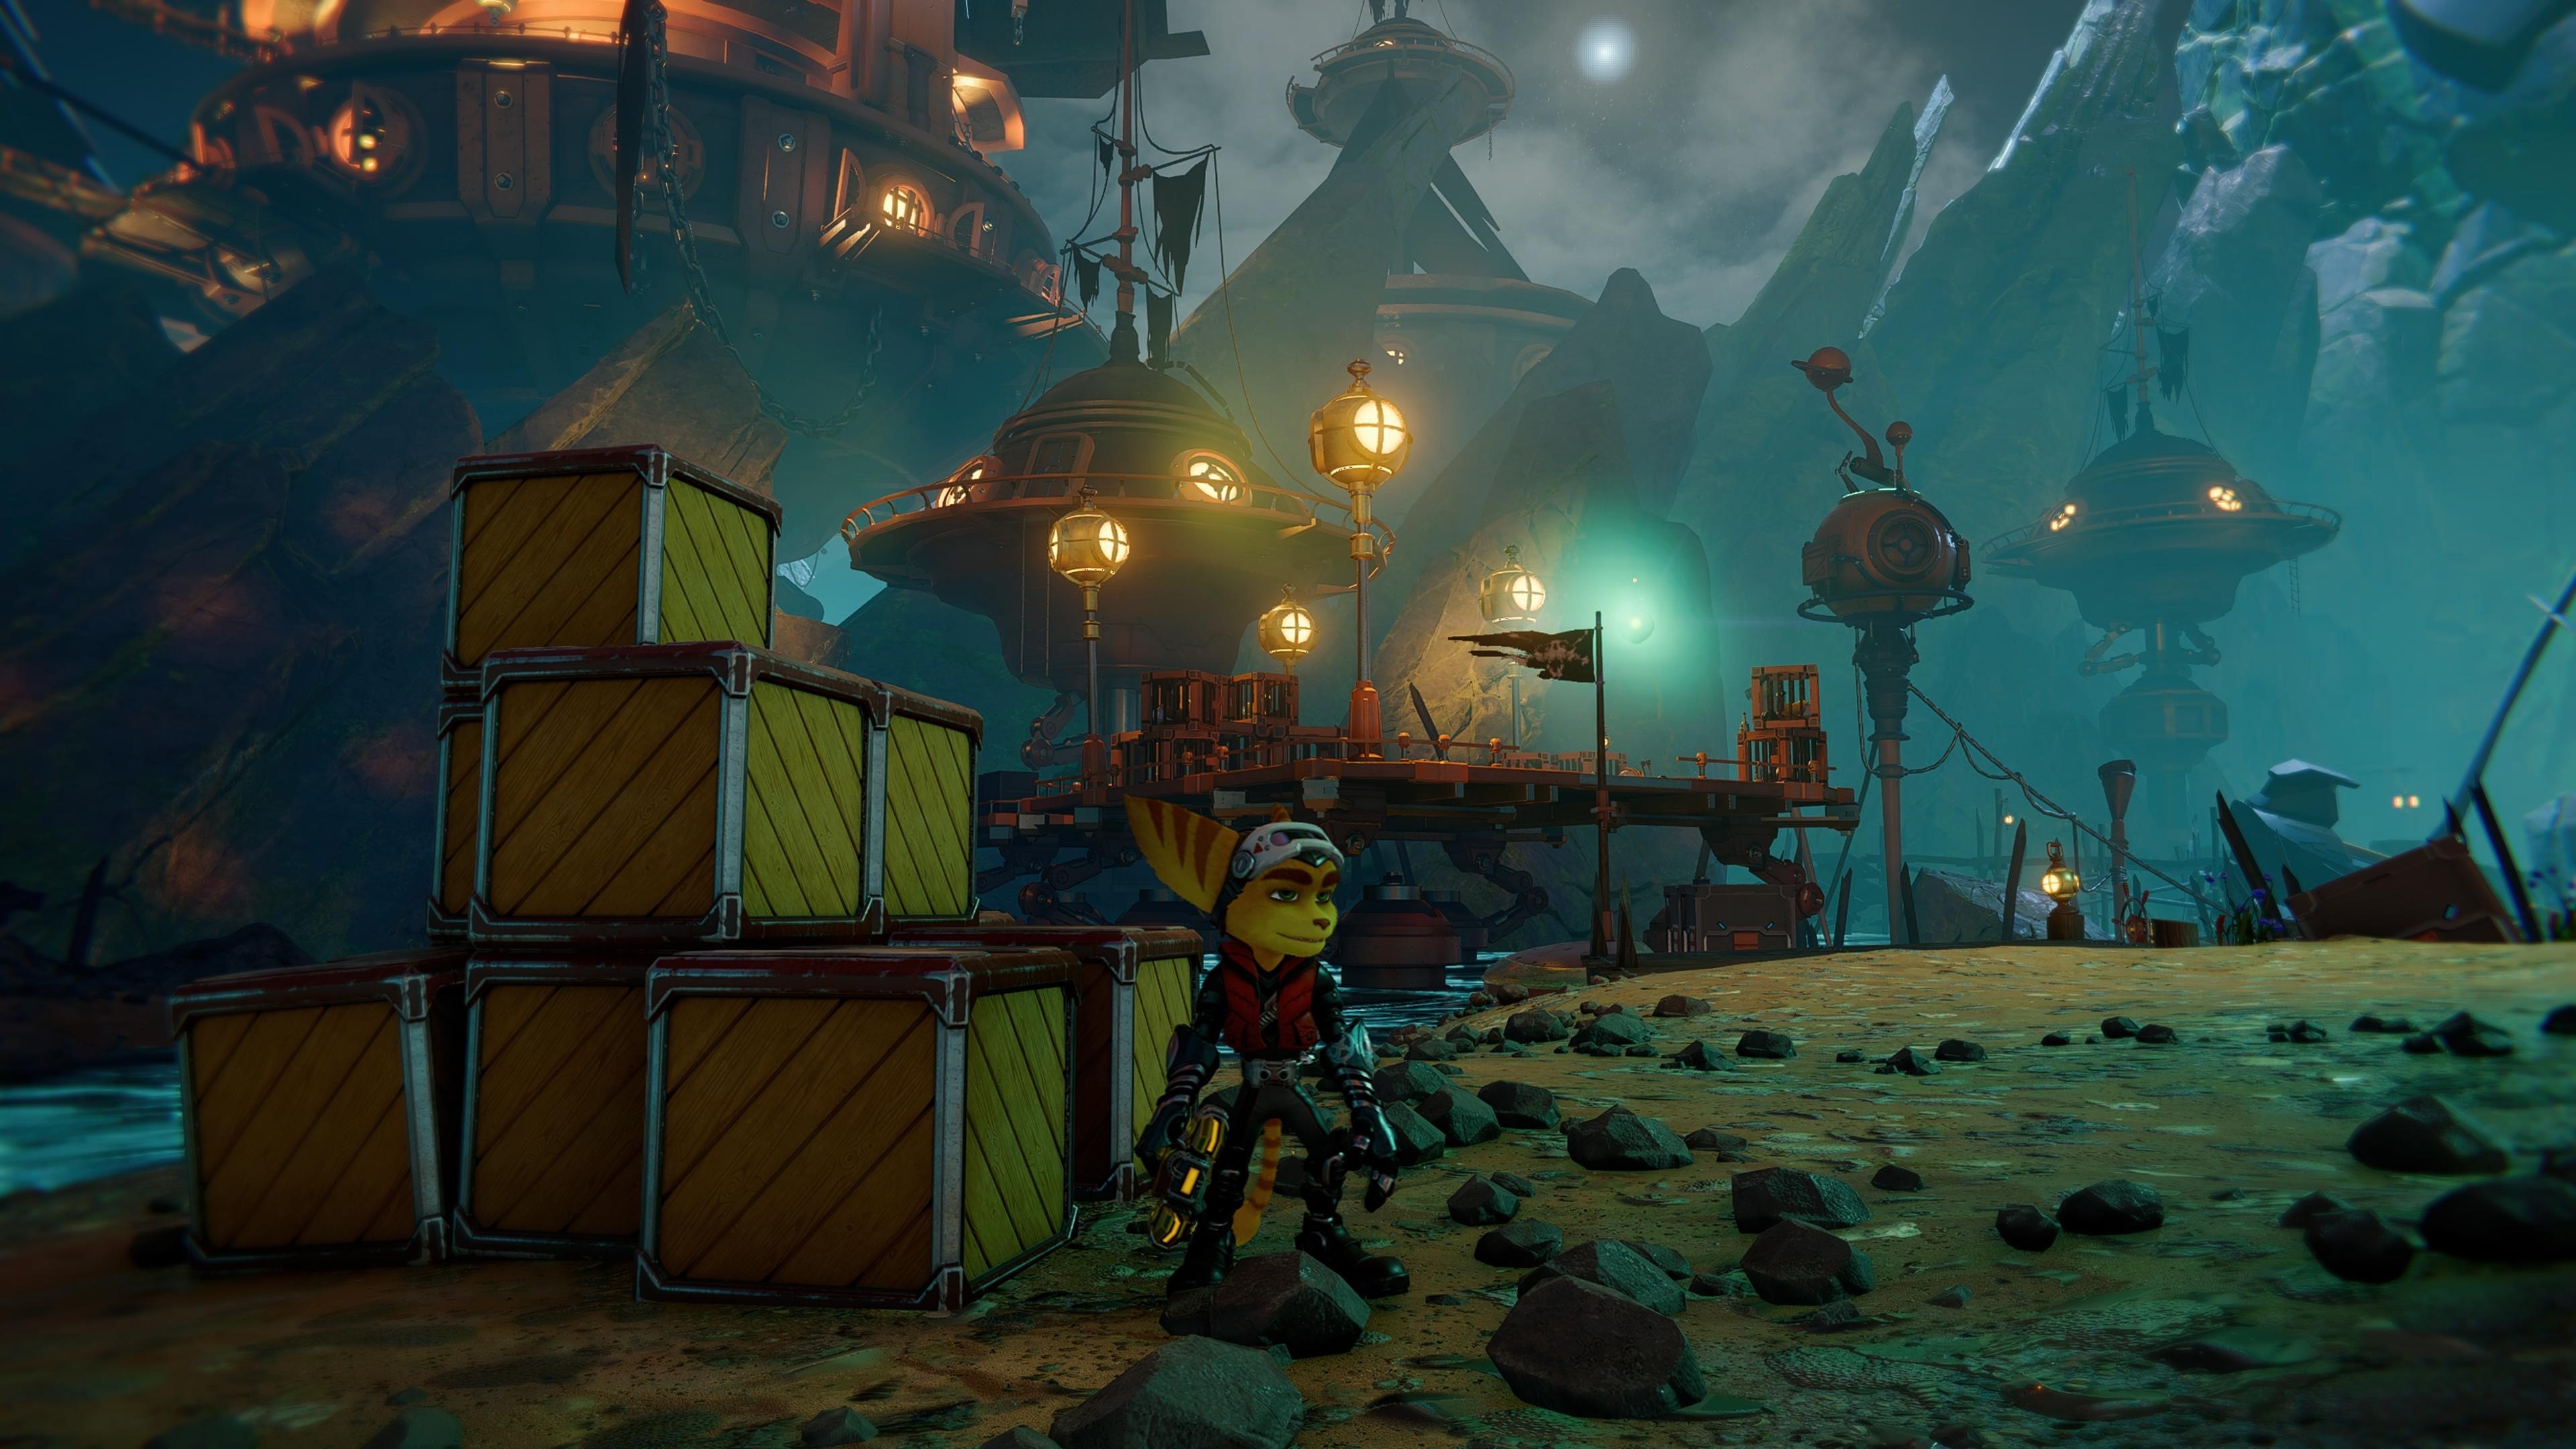 Ratchet wearing a visor and standing in front of a stack of crates on a dark beach.